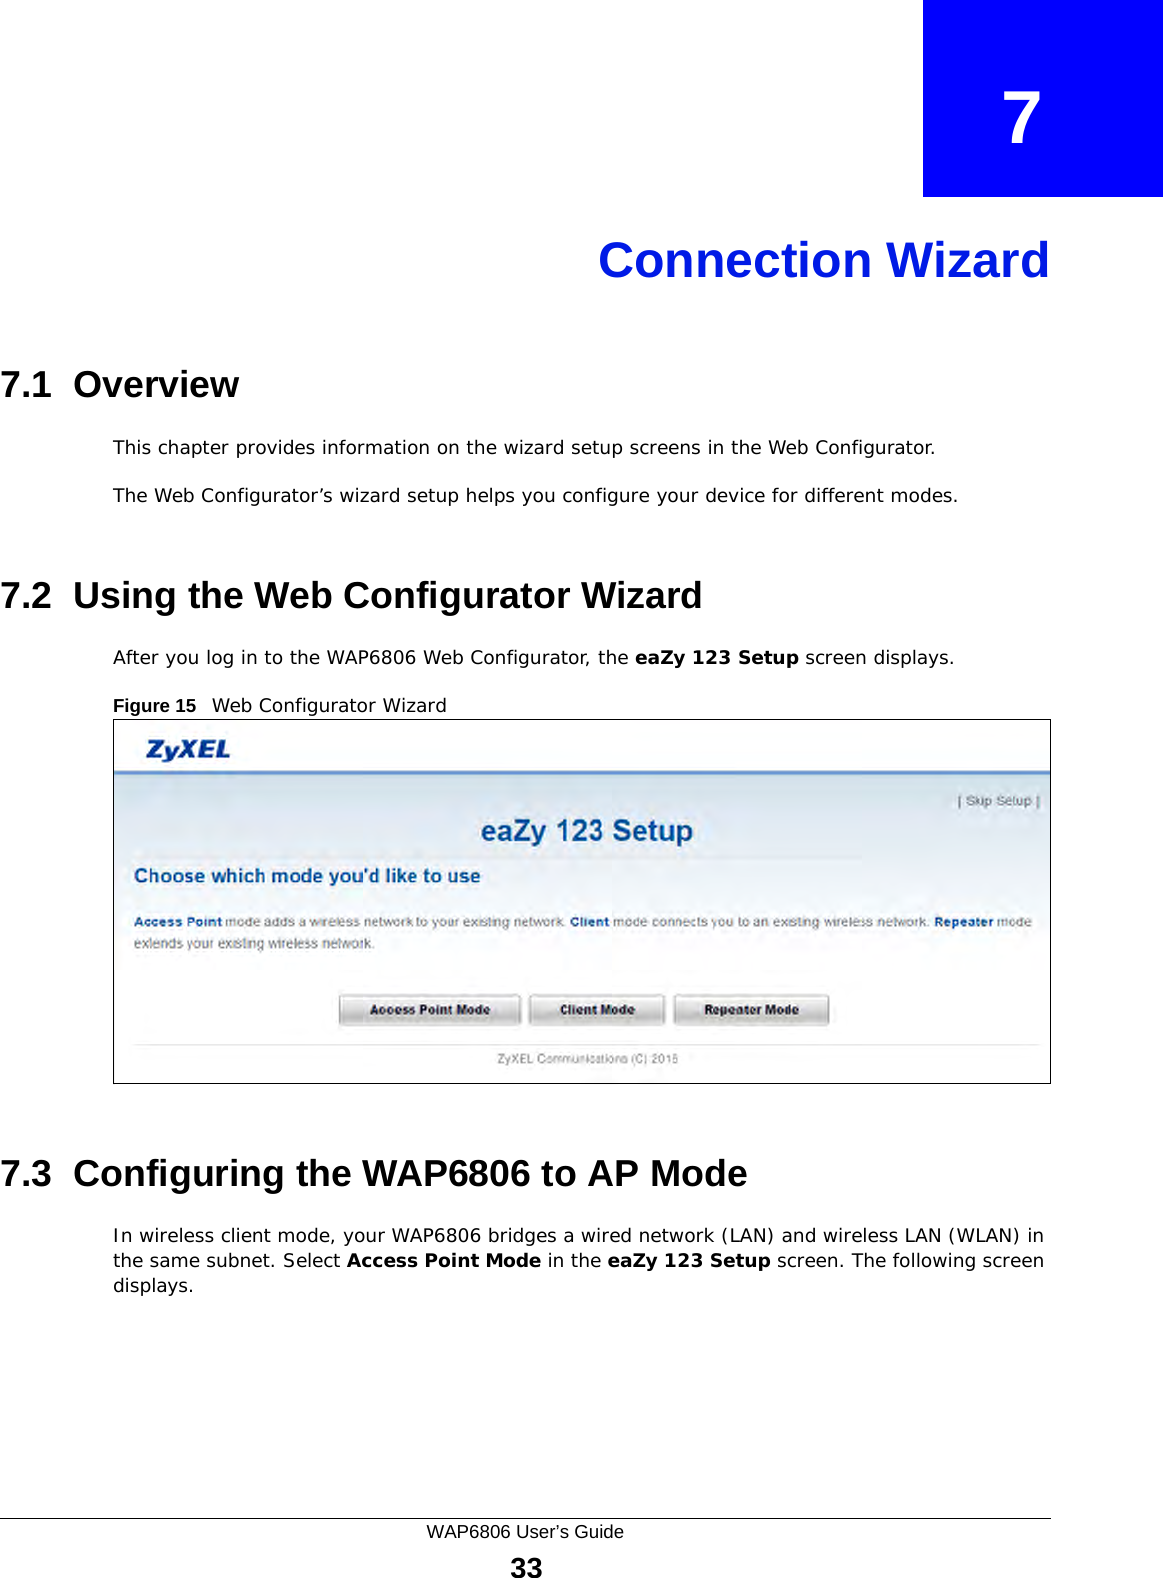 WAP6806 User’s Guide33CHAPTER   7Connection Wizard7.1  OverviewThis chapter provides information on the wizard setup screens in the Web Configurator.The Web Configurator’s wizard setup helps you configure your device for different modes.7.2  Using the Web Configurator WizardAfter you log in to the WAP6806 Web Configurator, the eaZy 123 Setup screen displays.Figure 15   Web Configurator Wizard7.3  Configuring the WAP6806 to AP ModeIn wireless client mode, your WAP6806 bridges a wired network (LAN) and wireless LAN (WLAN) in the same subnet. Select Access Point Mode in the eaZy 123 Setup screen. The following screen displays. 